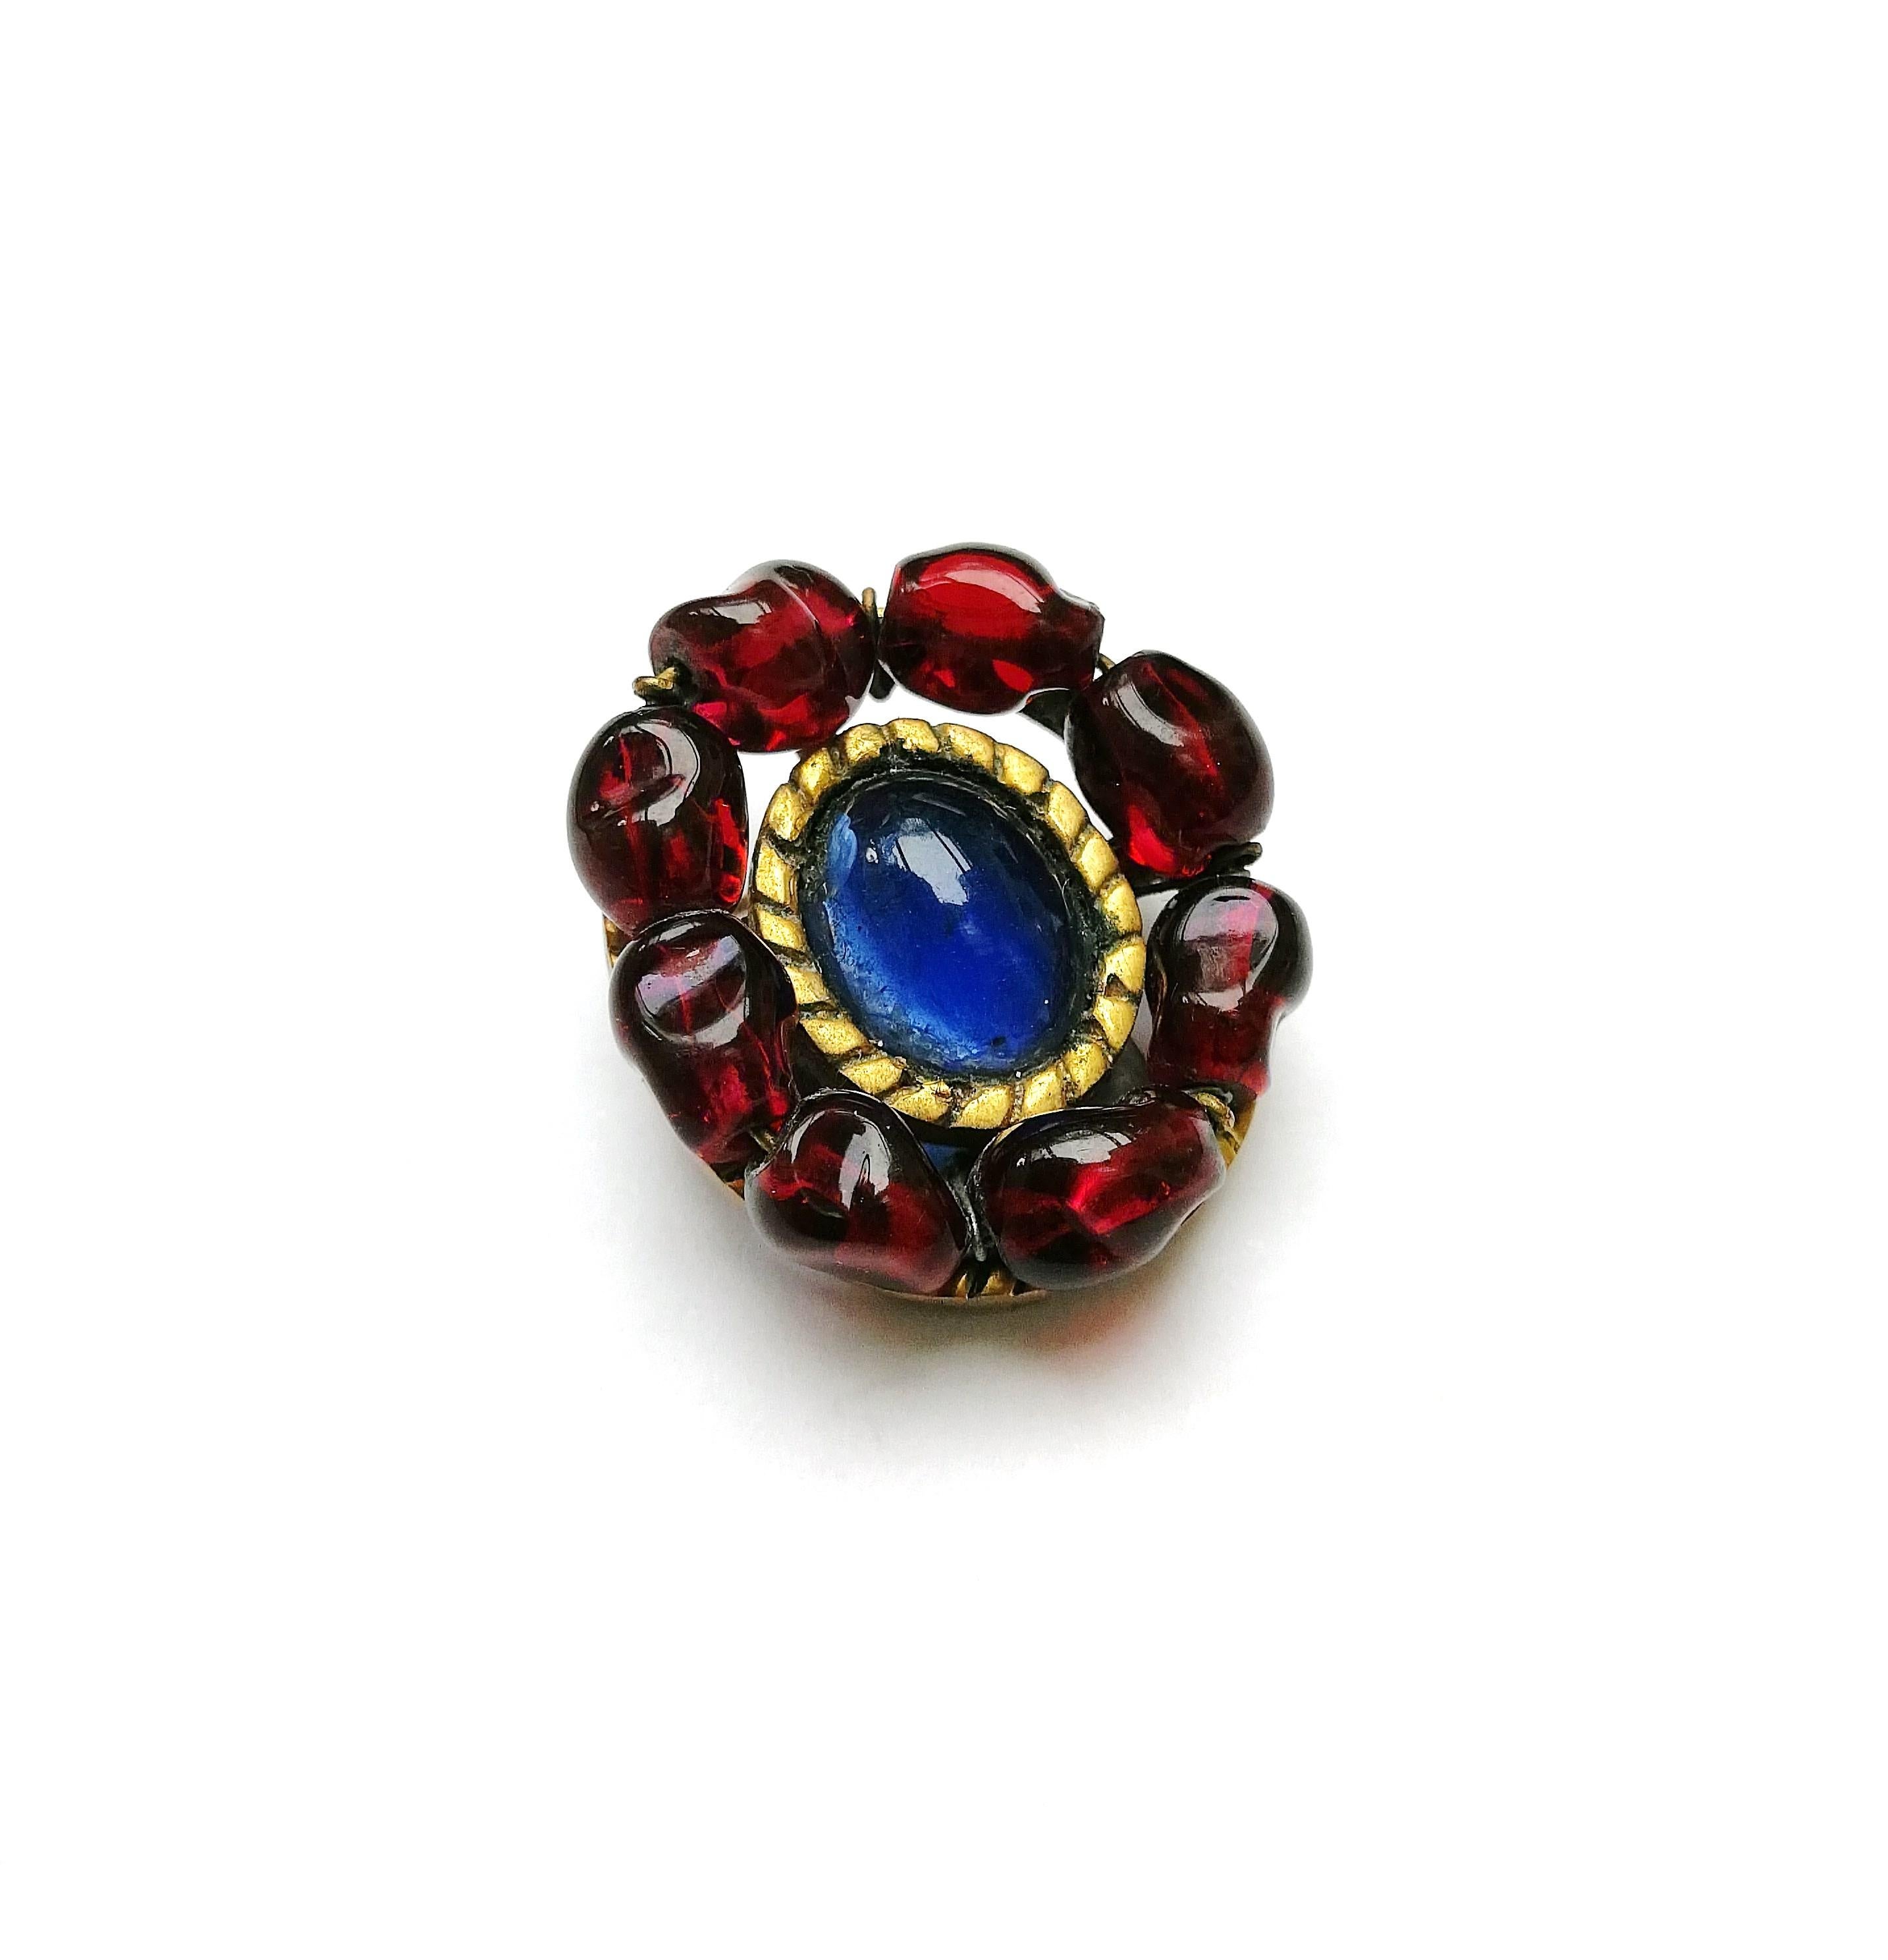 Ruby and sapphire poured glass earrings, att. Maison Gripoix for Chanel, 1930s. 1